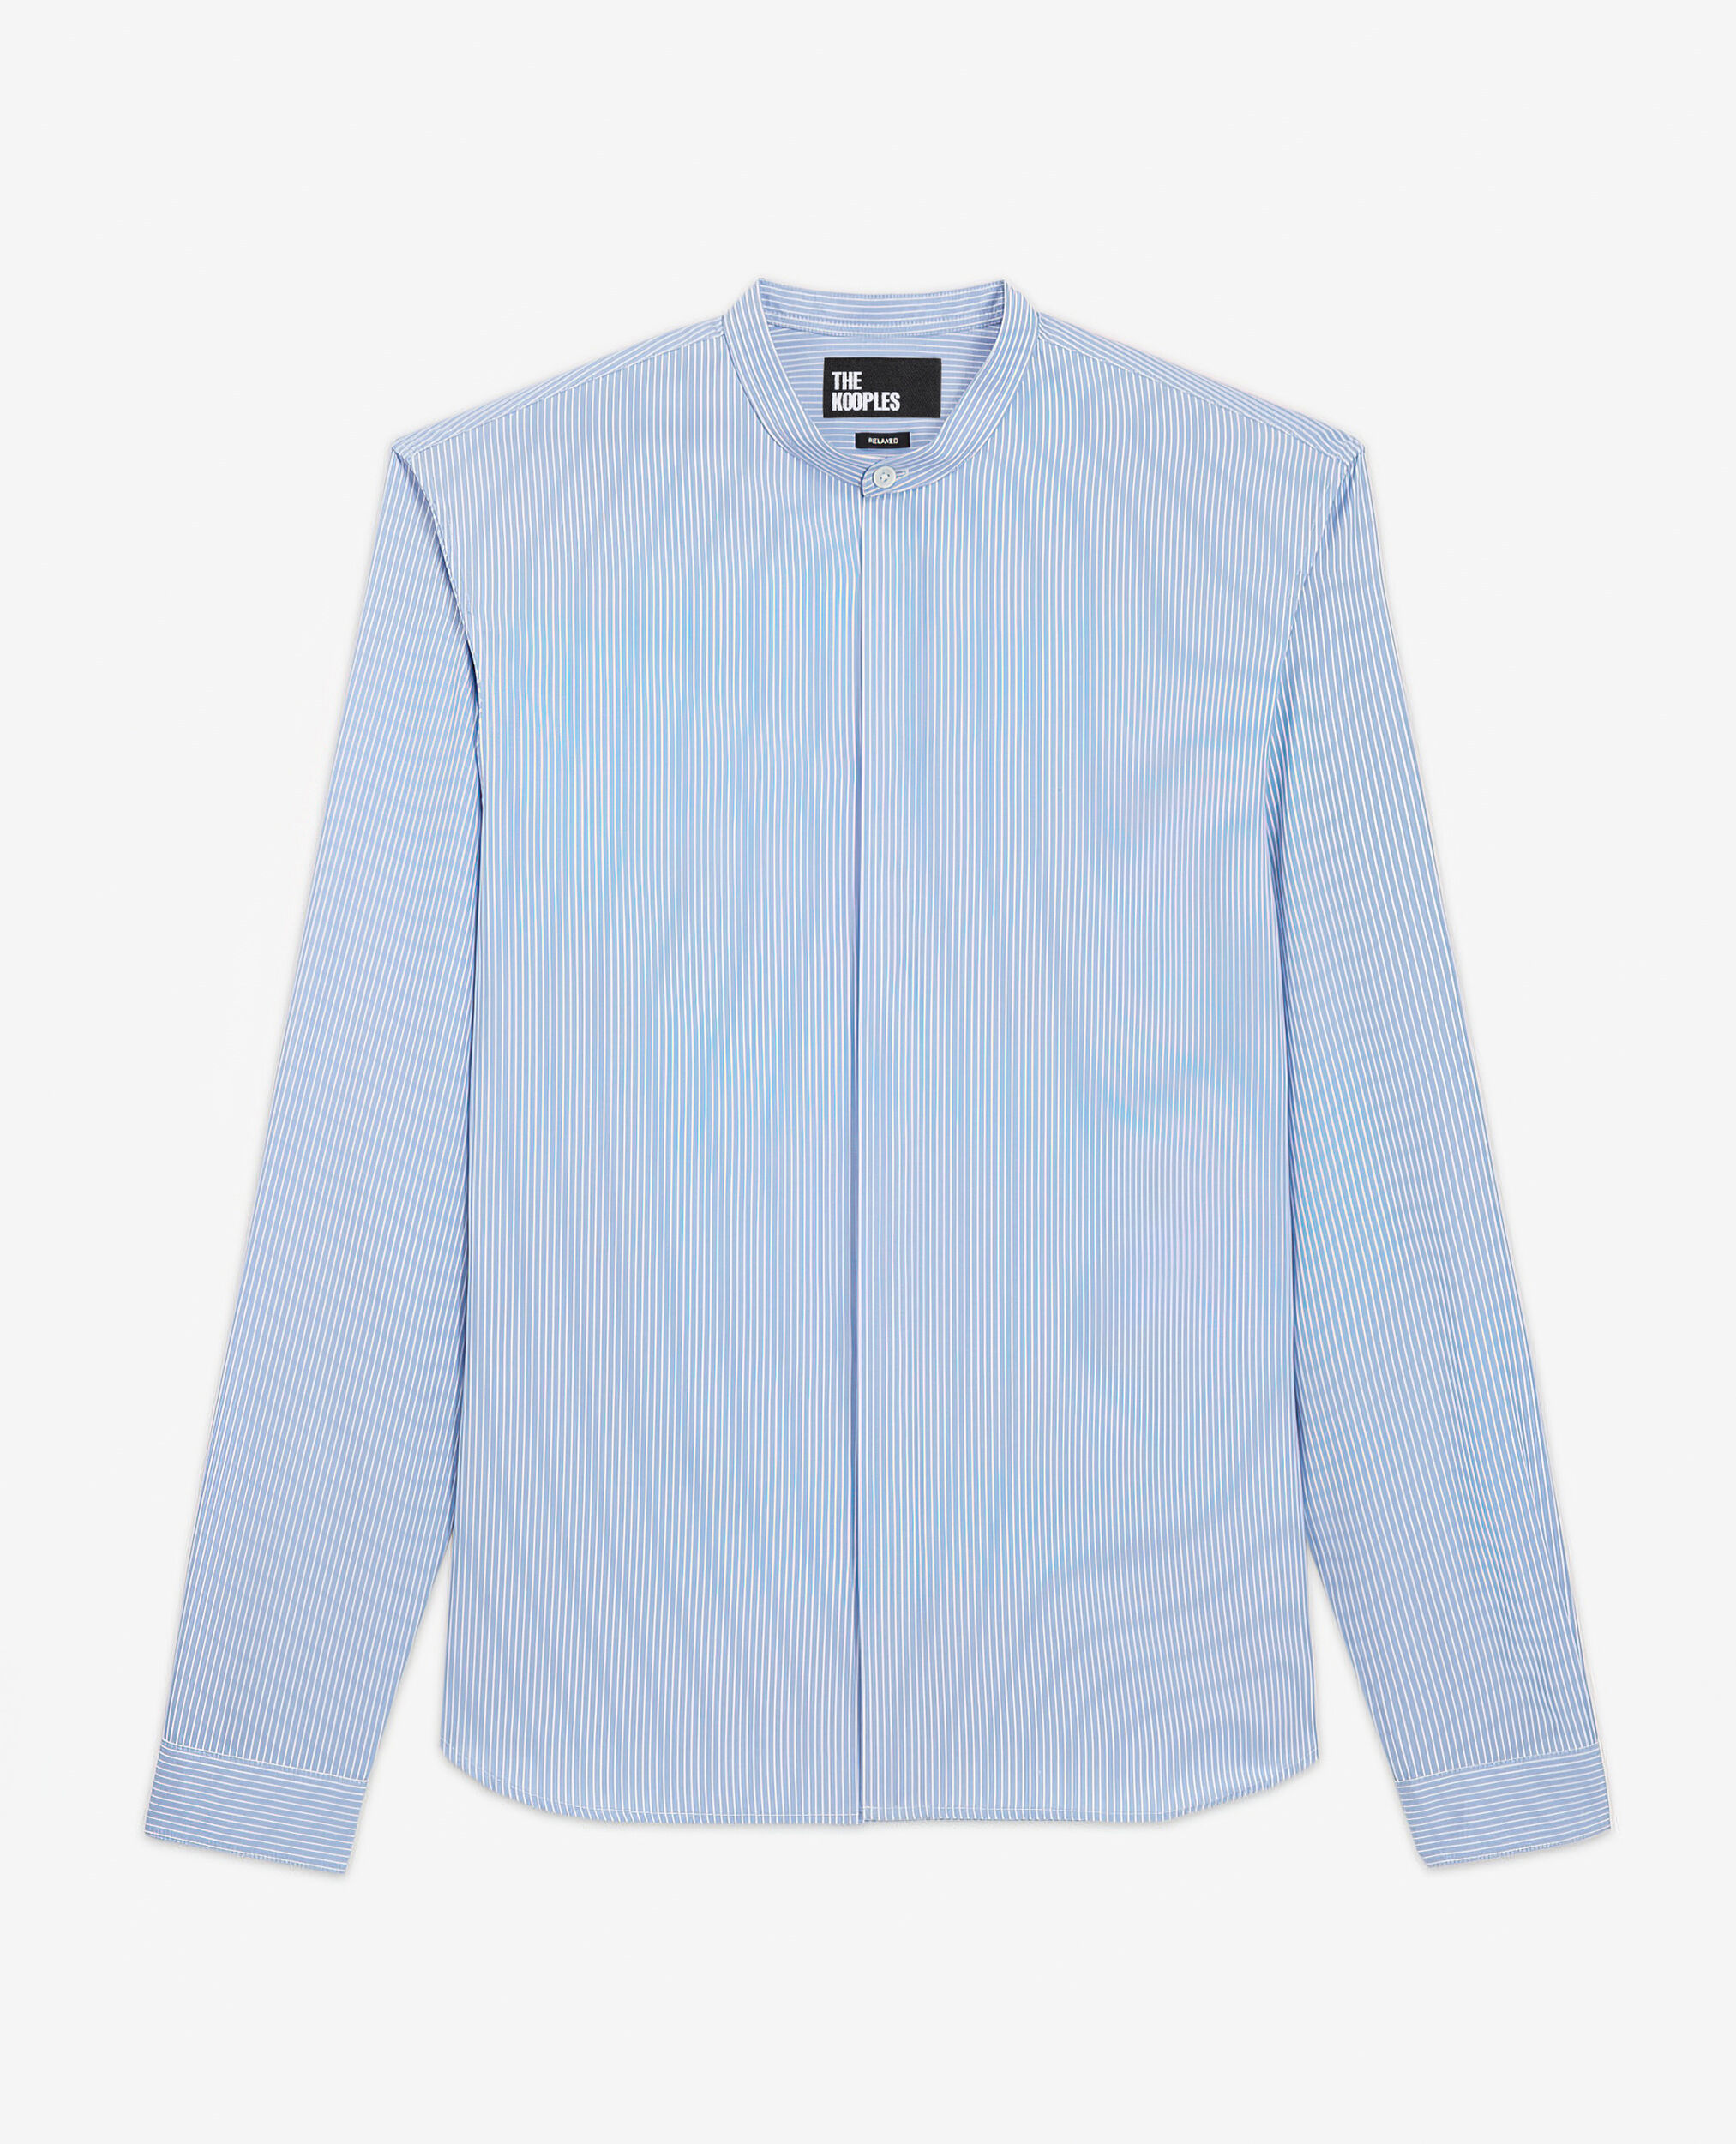 Chemise rayée bleue, WHITE / SKY BLUE, hi-res image number null